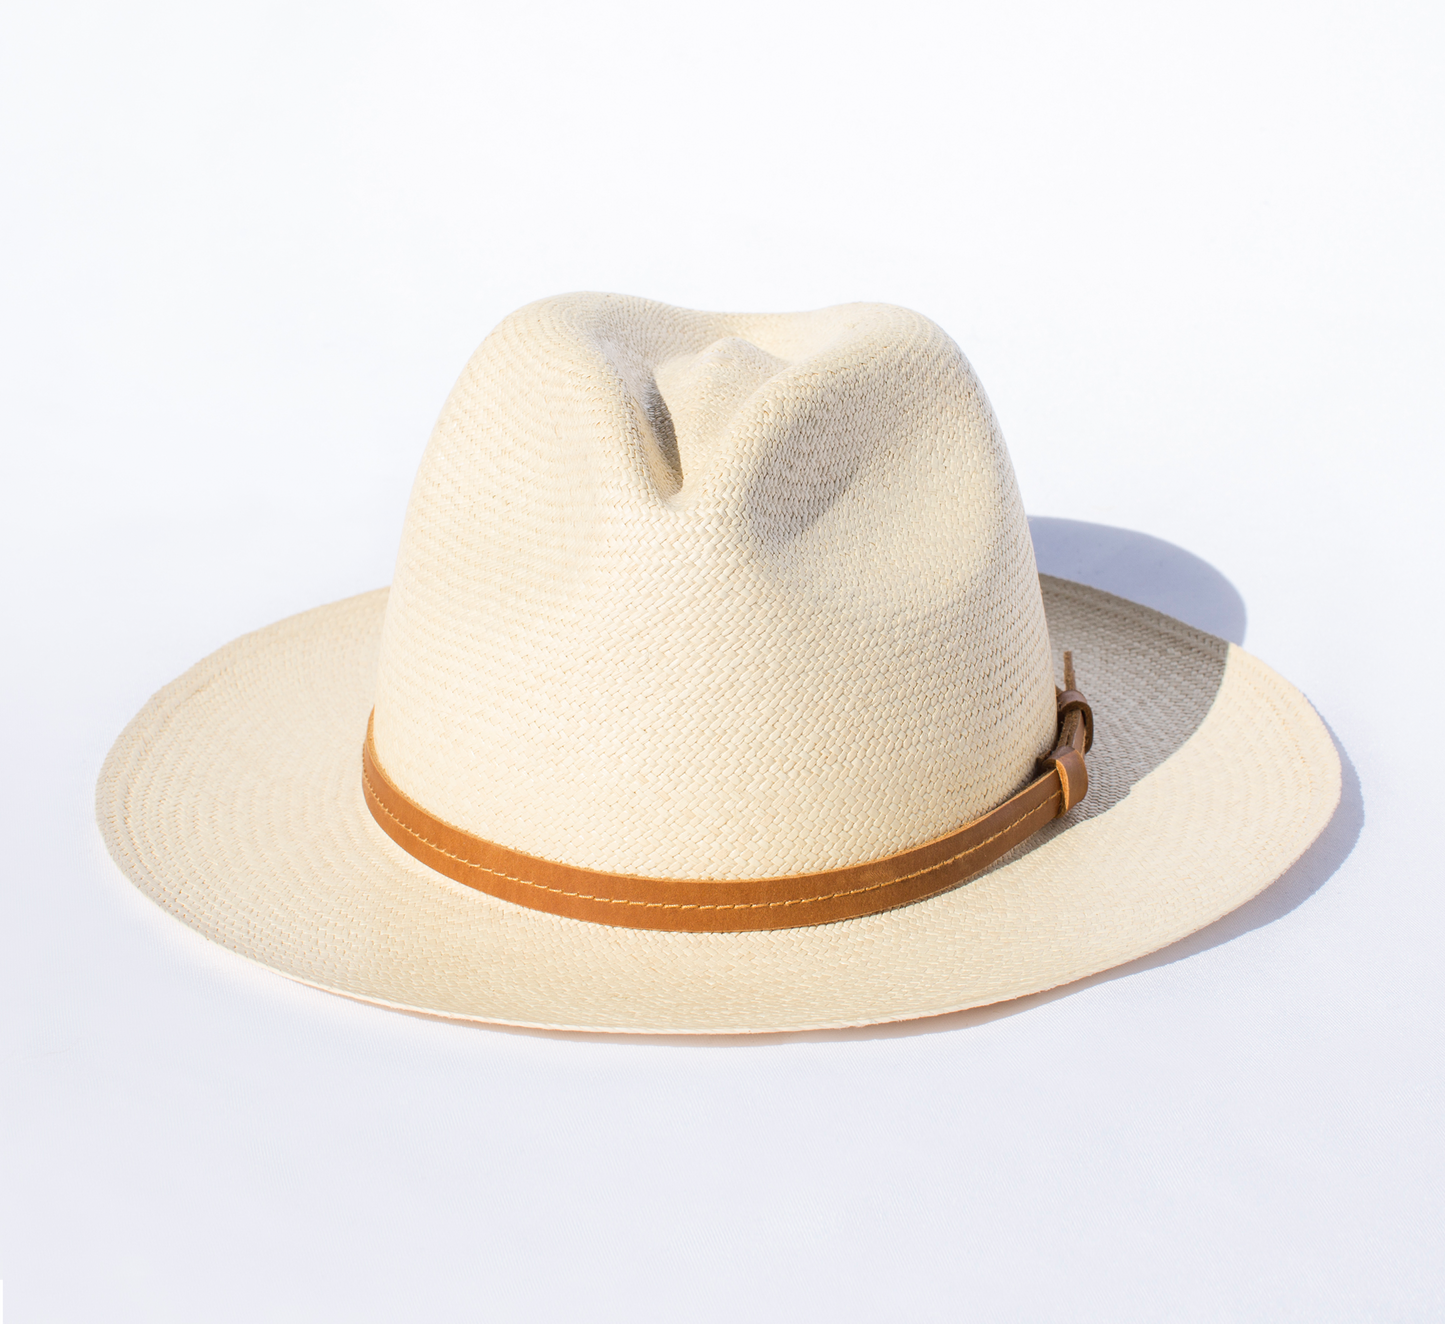 Classic Natural Panama Hat with Leather Headband - Unisex